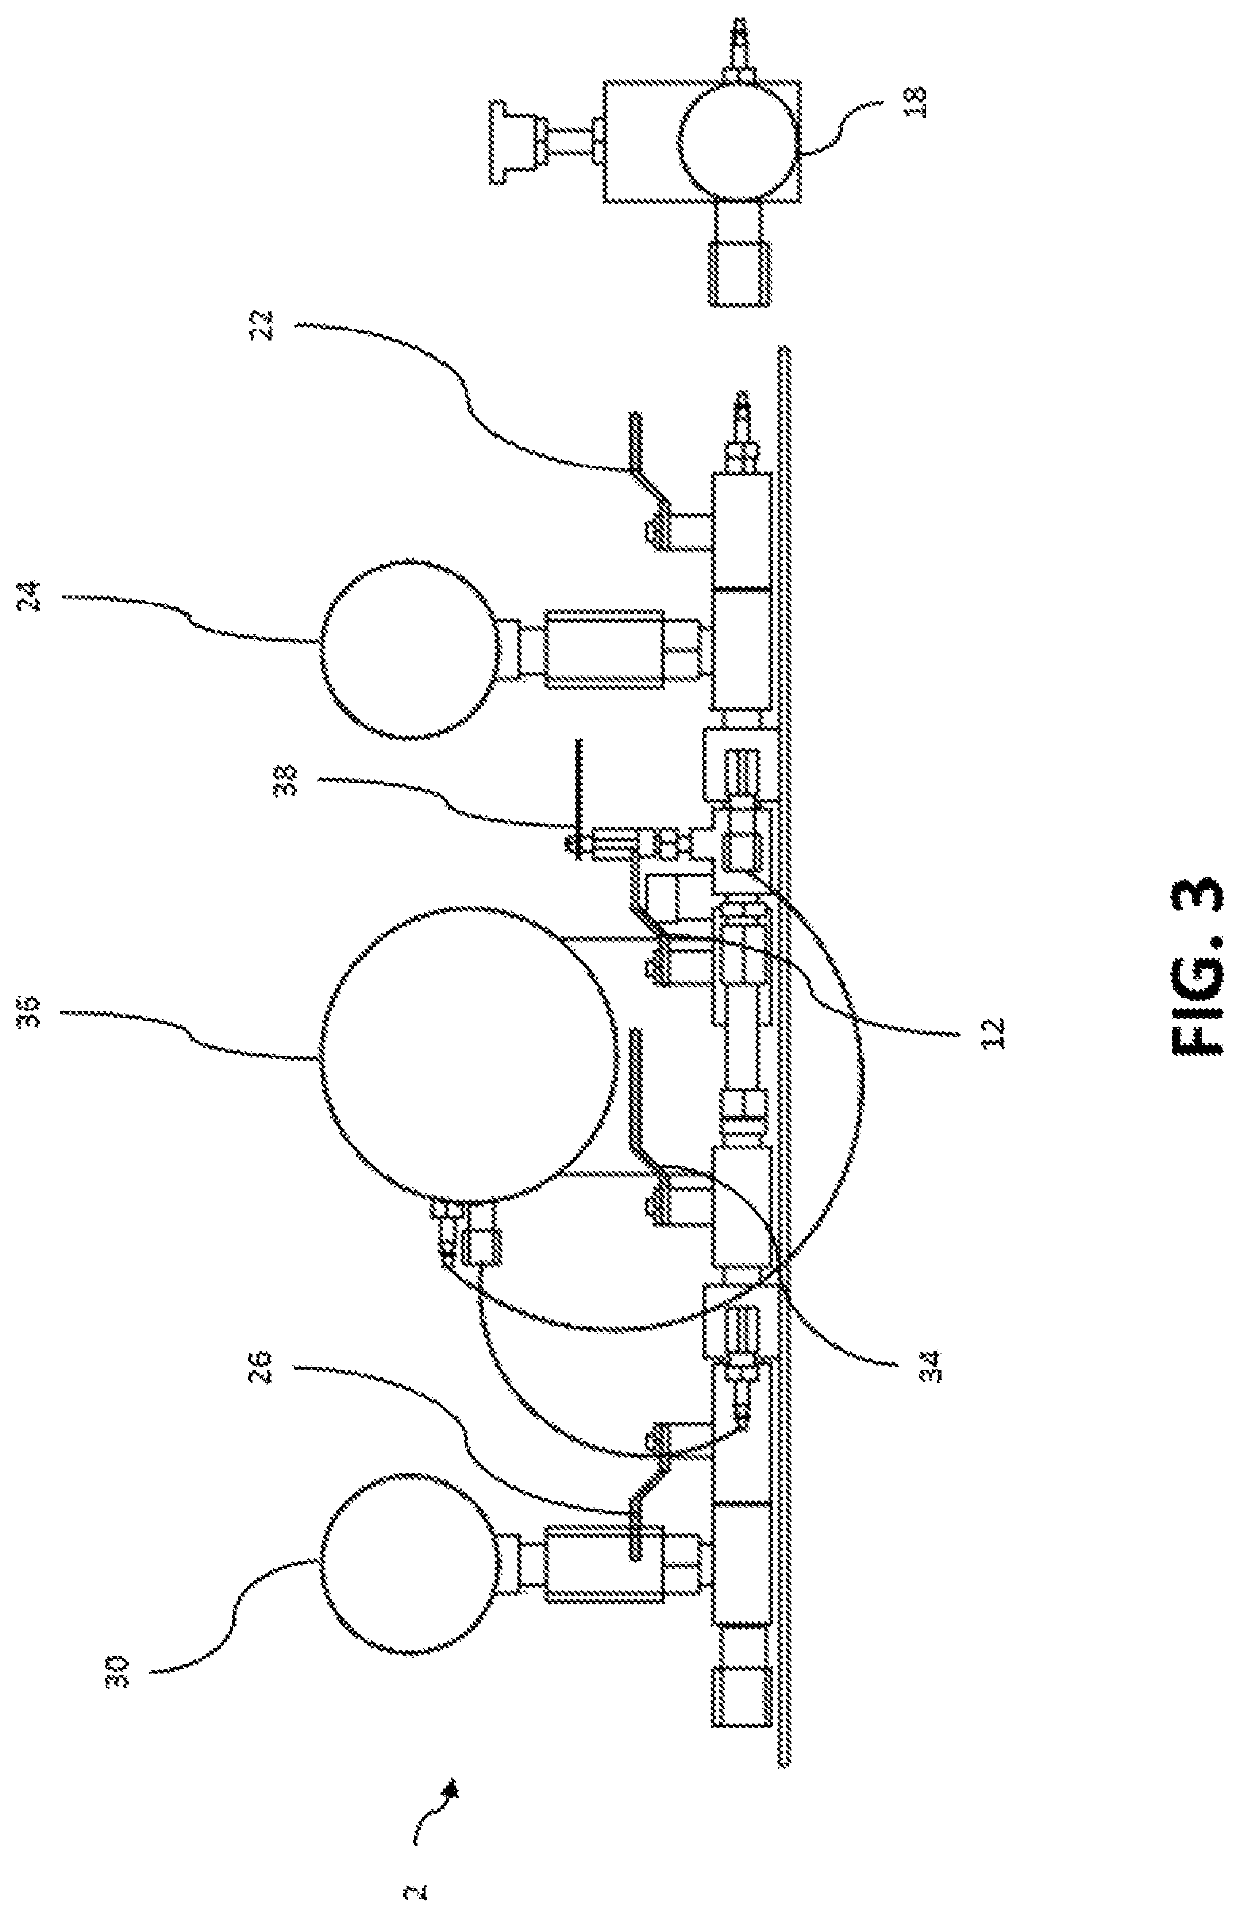 Device, system, and method for detecting equipment leaks